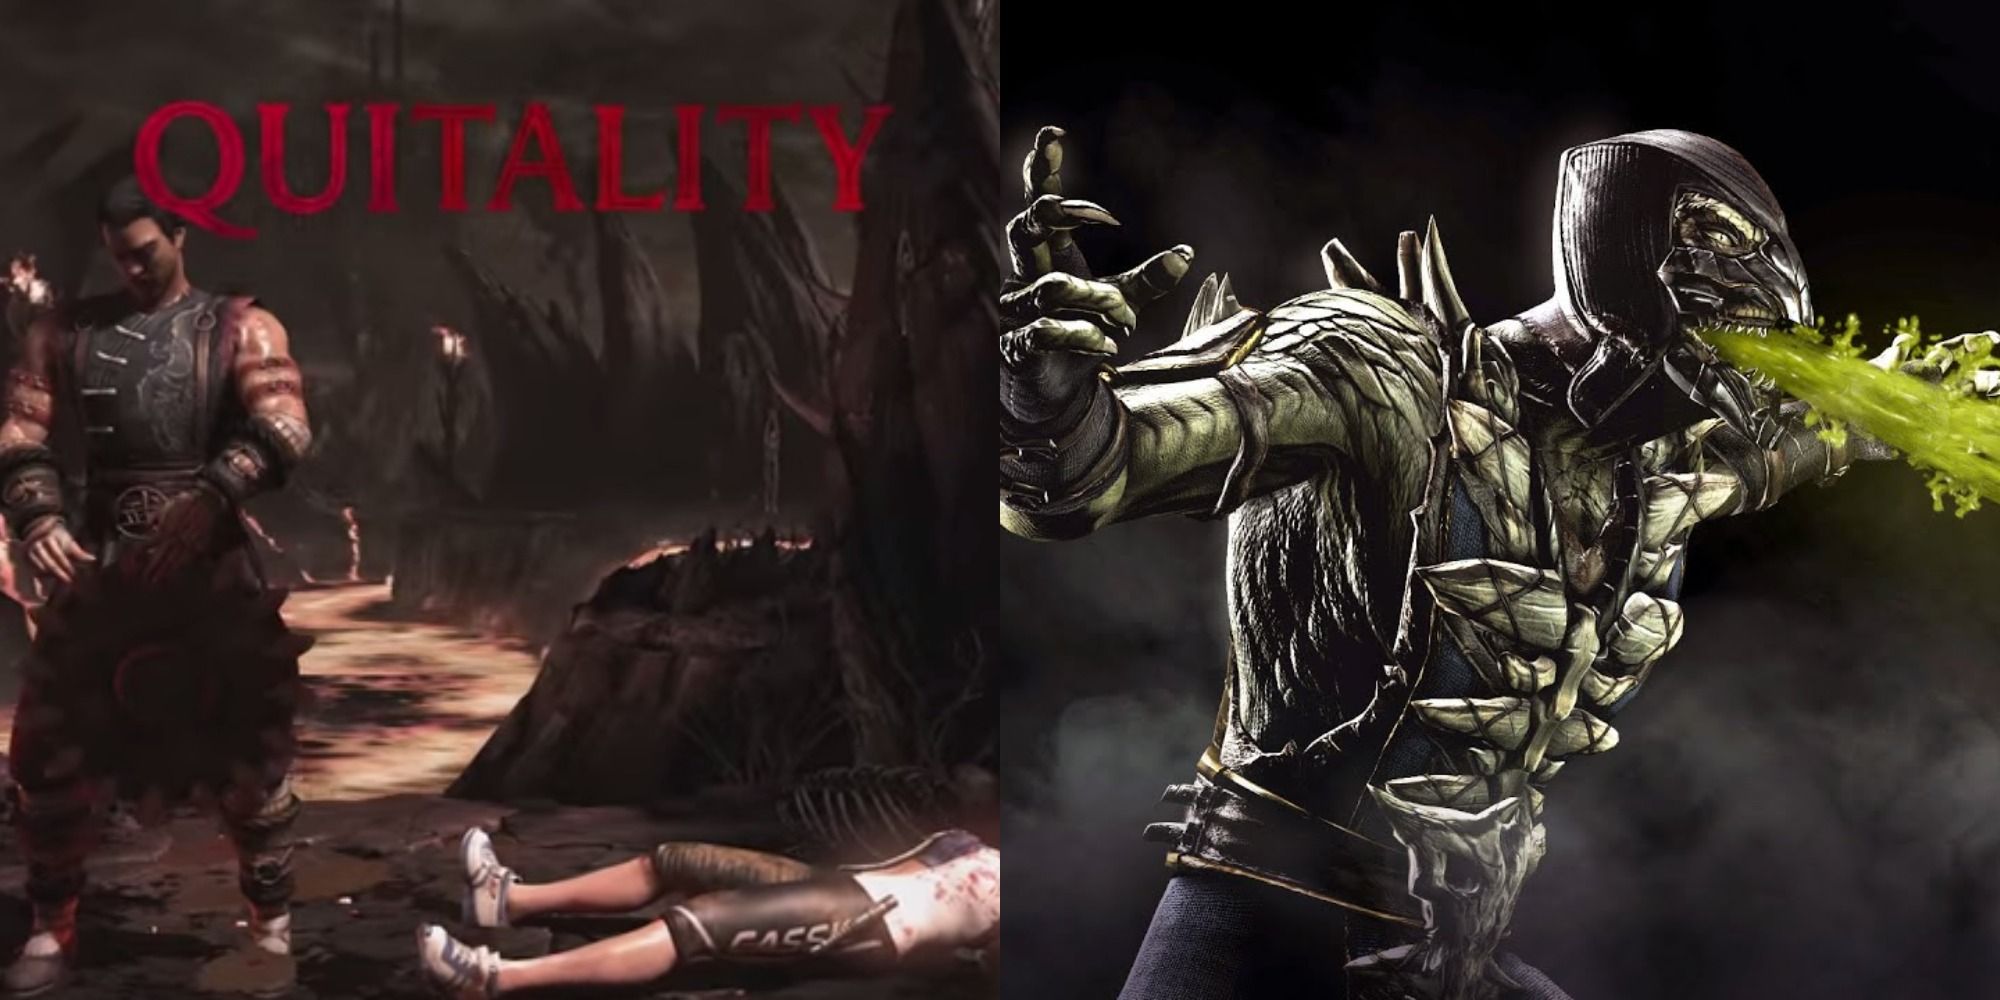 Split image showing a Quintality and Reptile spitting vile in Mortal Kombat